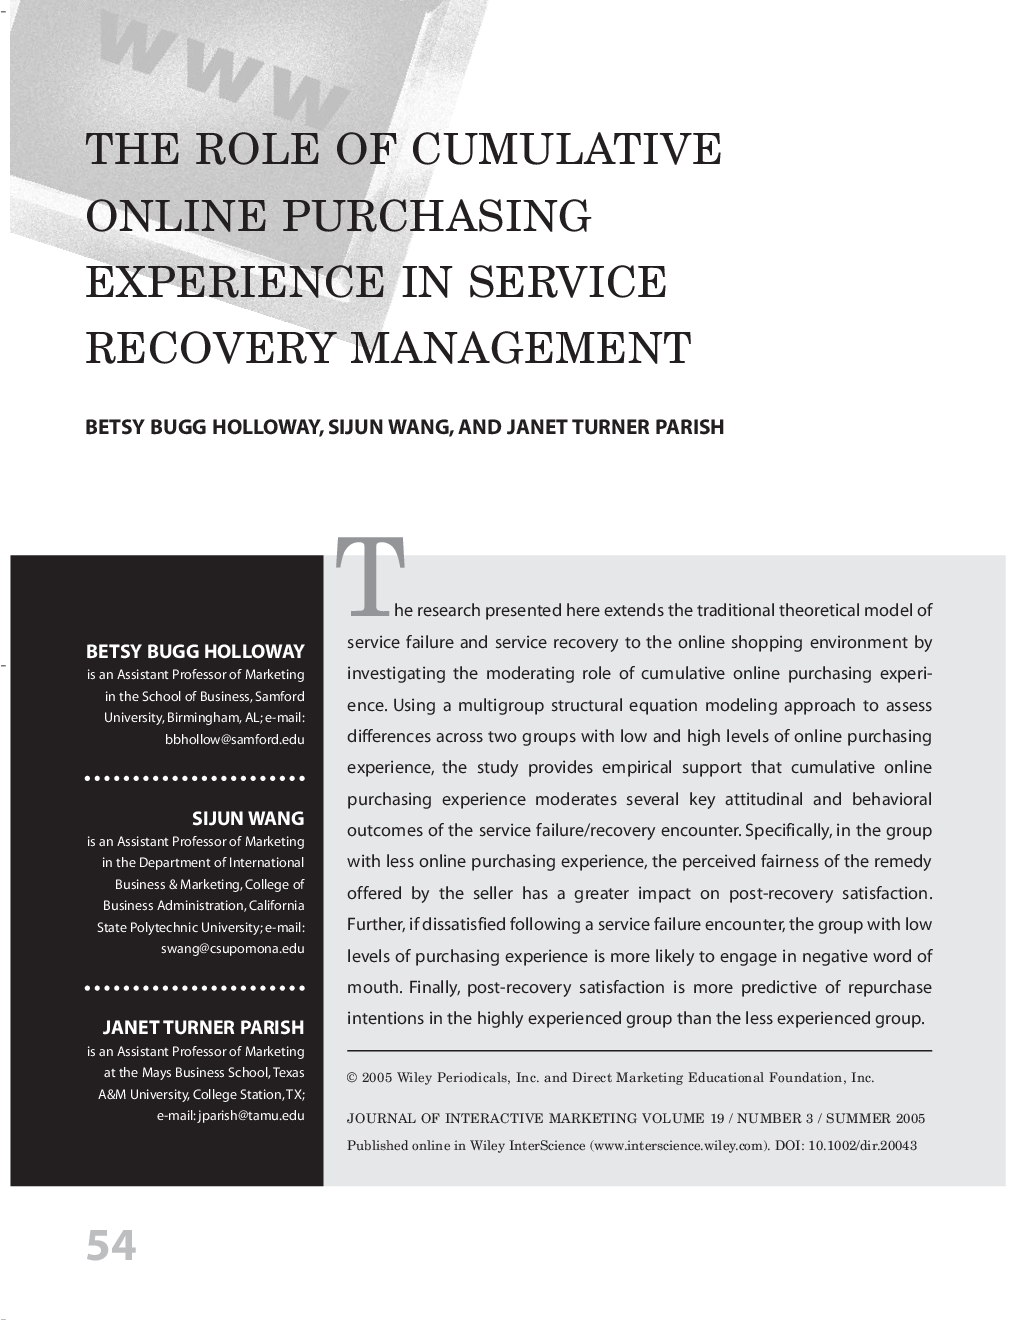 The role of cumulative online purchasing experience in service recovery management